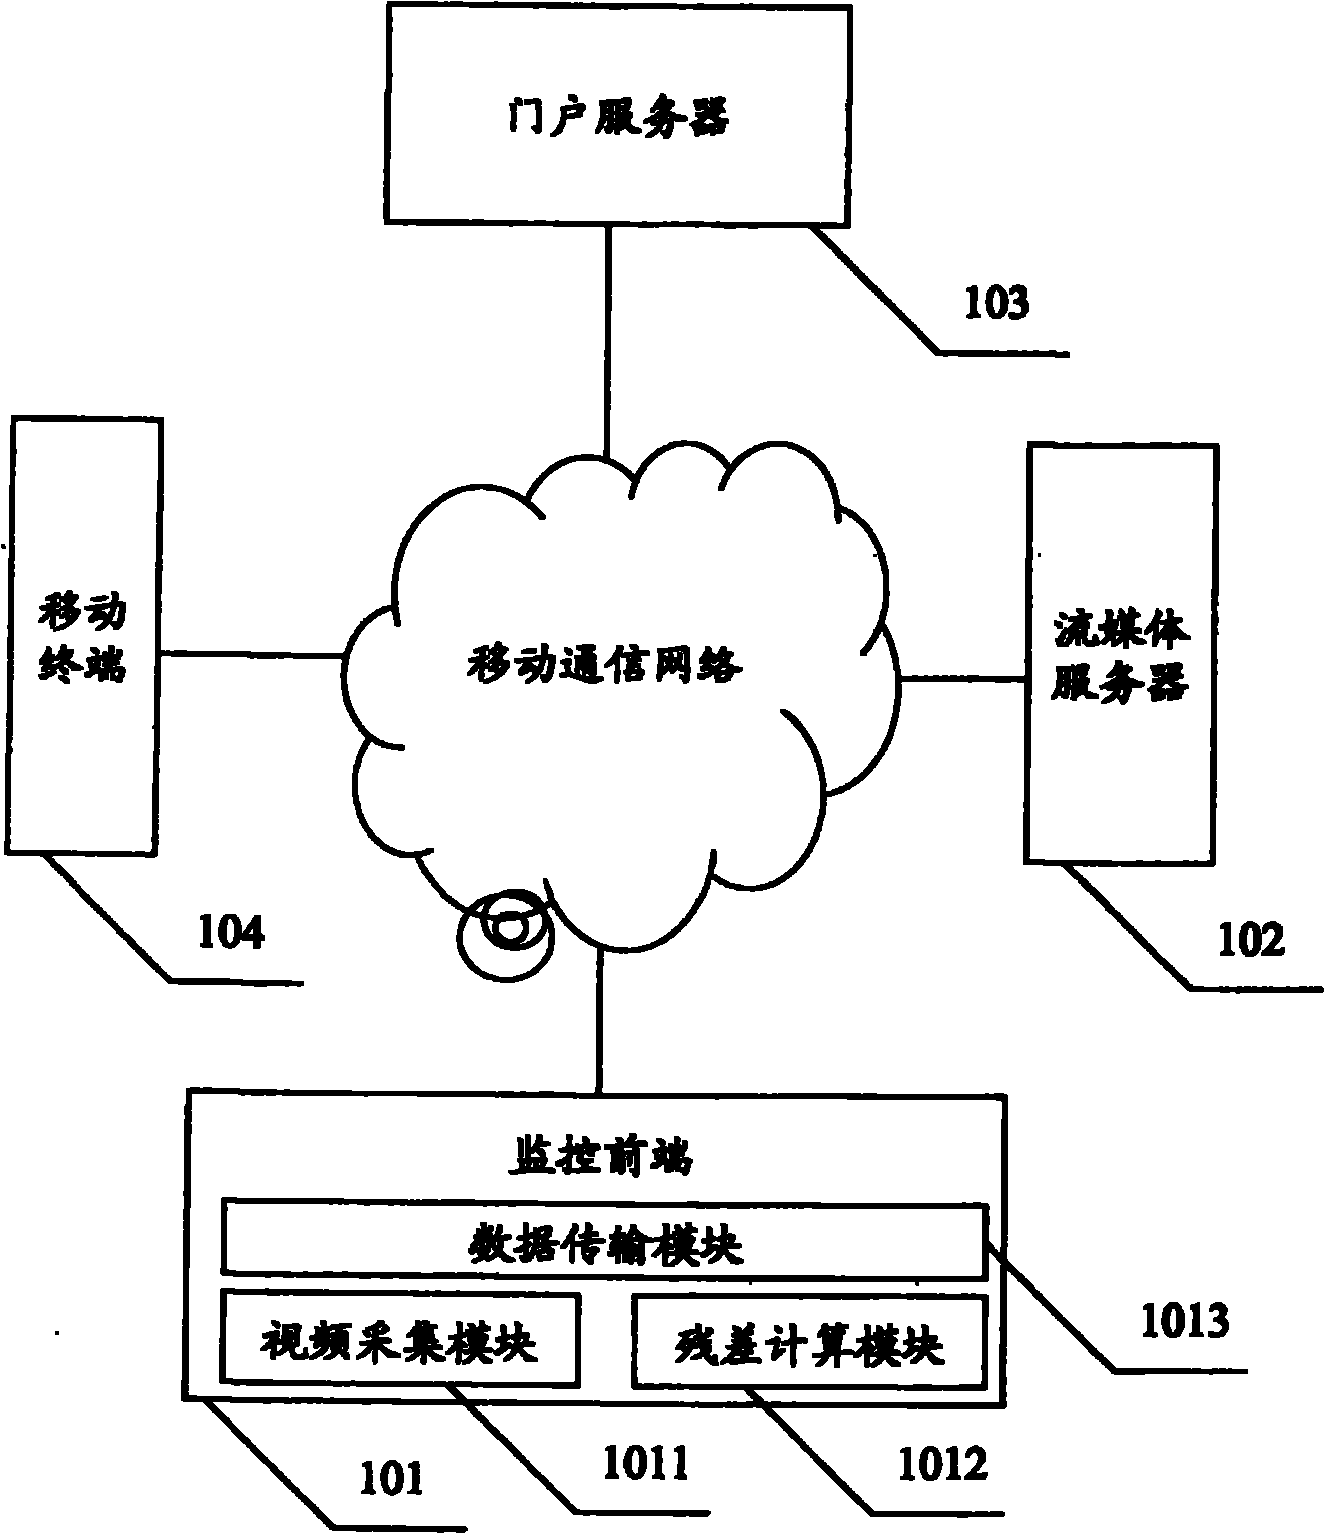 Mobile video monitoring system and method